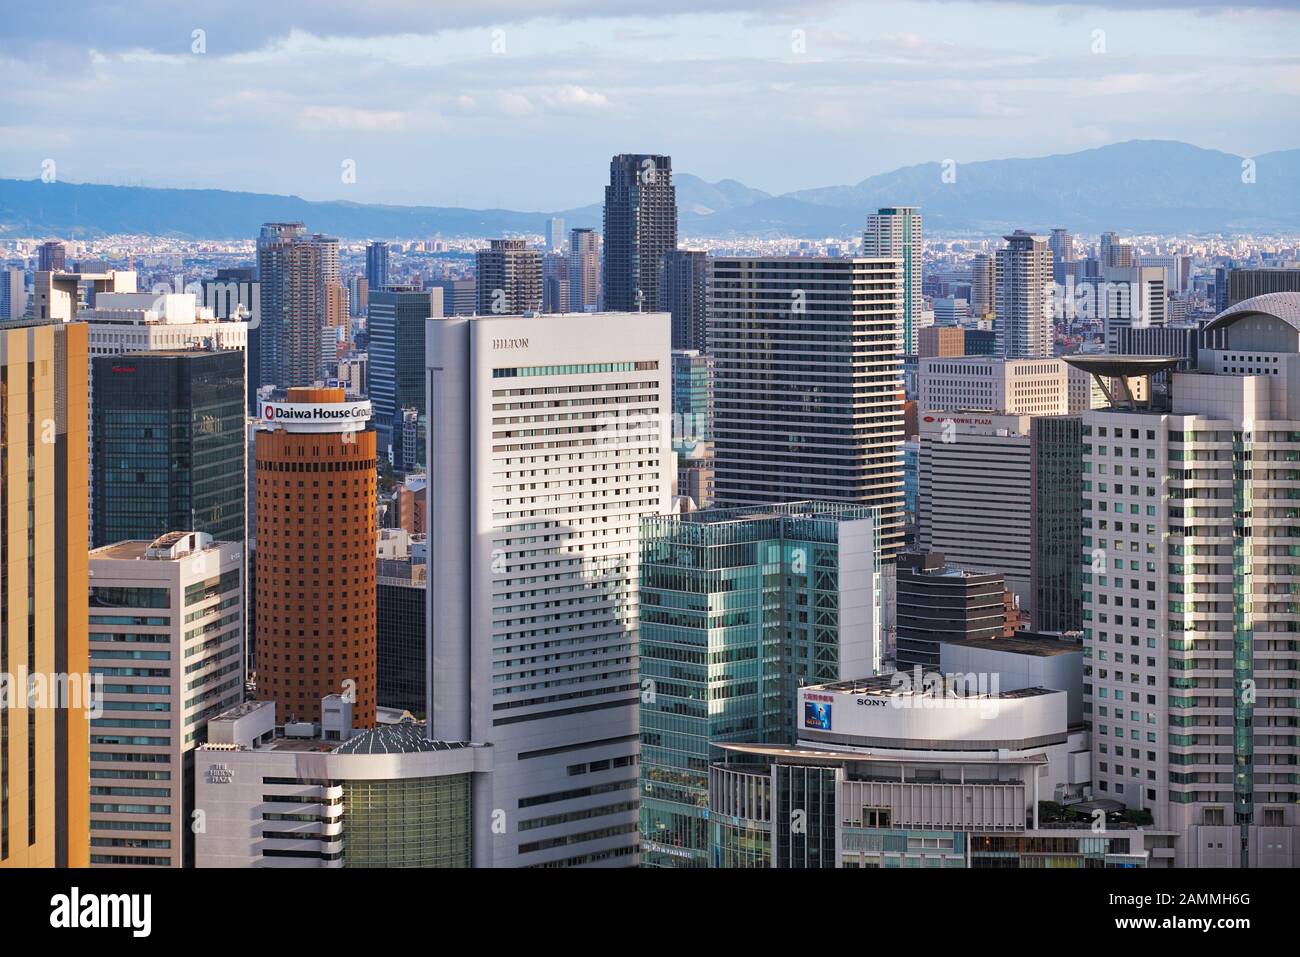 OSAKA, JAPAN - OCTOBER 15, 2019: The view from the Umeda Sky Building Observatory to the skyscraper center with Herbis Plaza in front of JR Osaka Stat Stock Photo